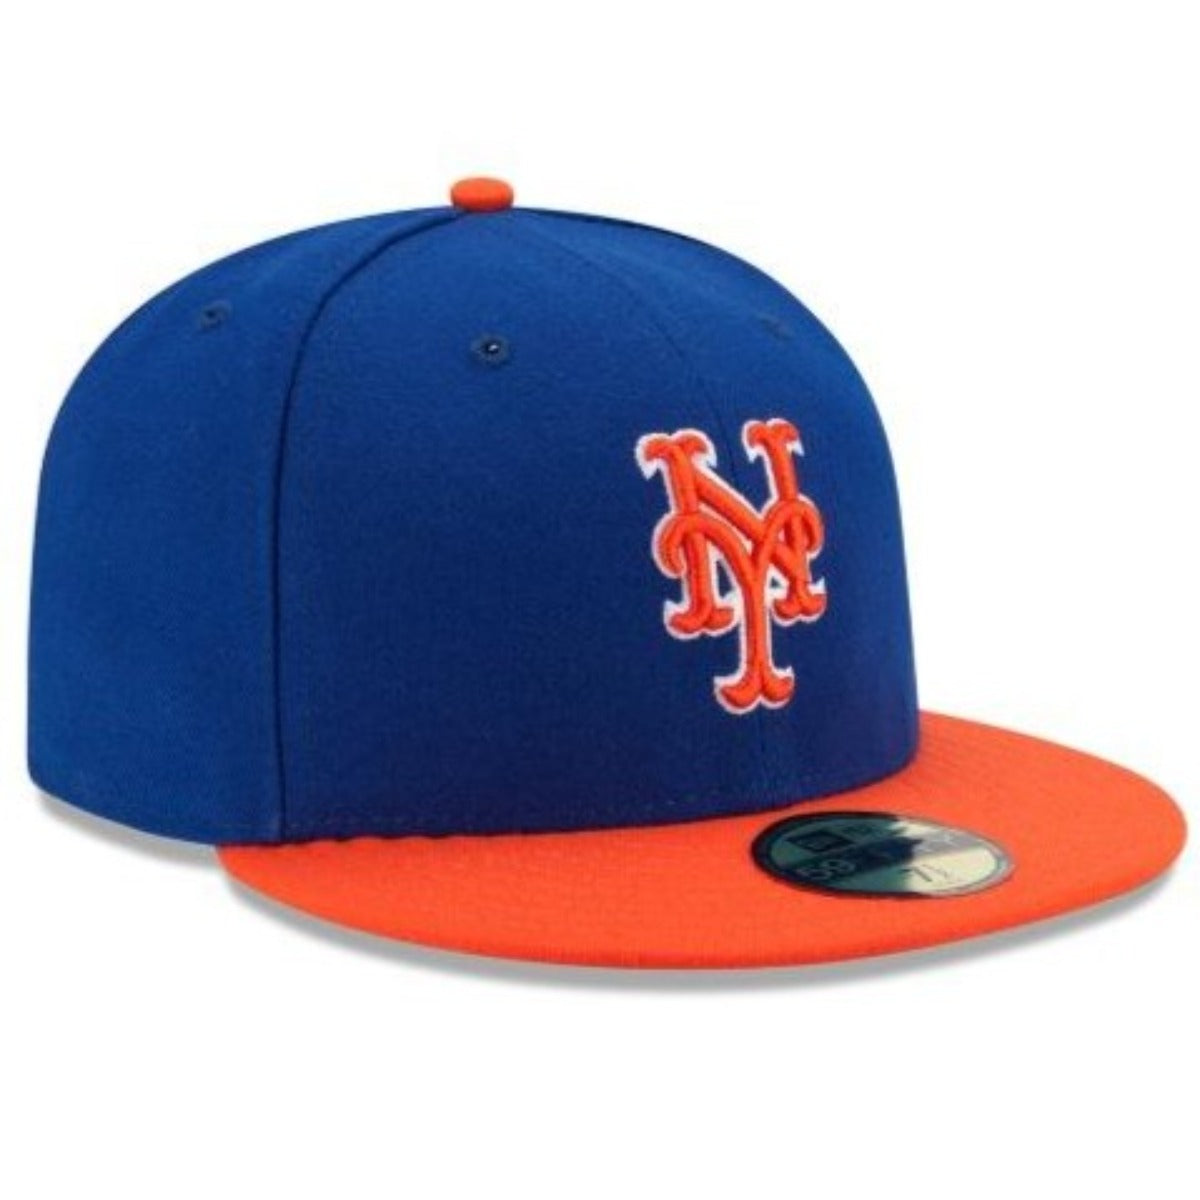 NEW YORK METS ALTERNATE COLLECTION 59FIFTY- Blue/Orange Nvsoccer.com Thecoliseum